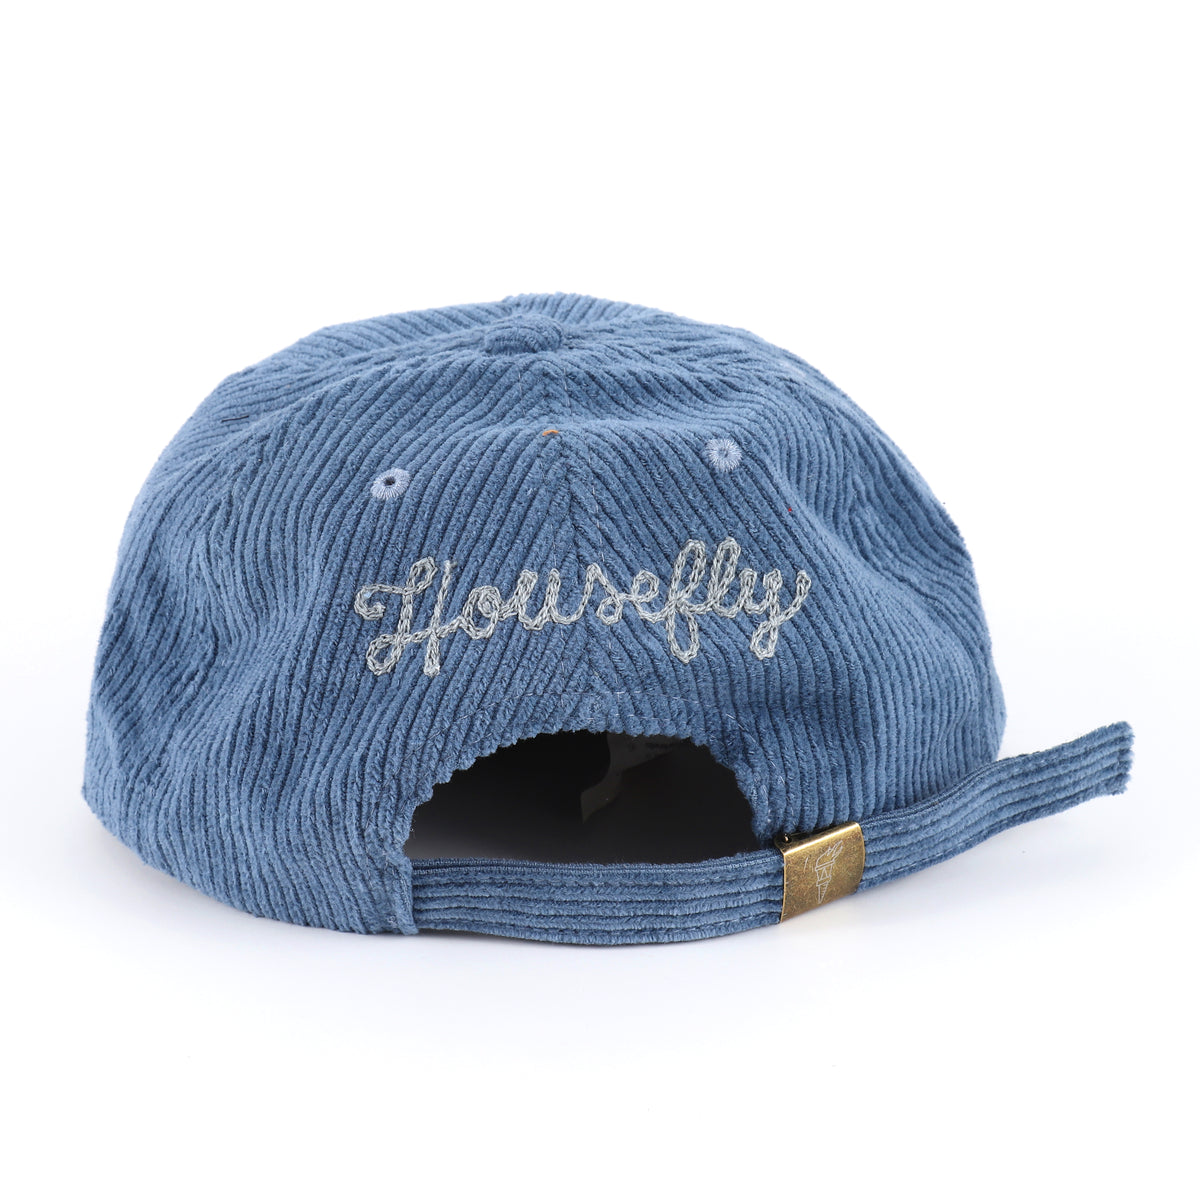 Pumpkinseed Chainstitch Embroidered Hat - HF Blue